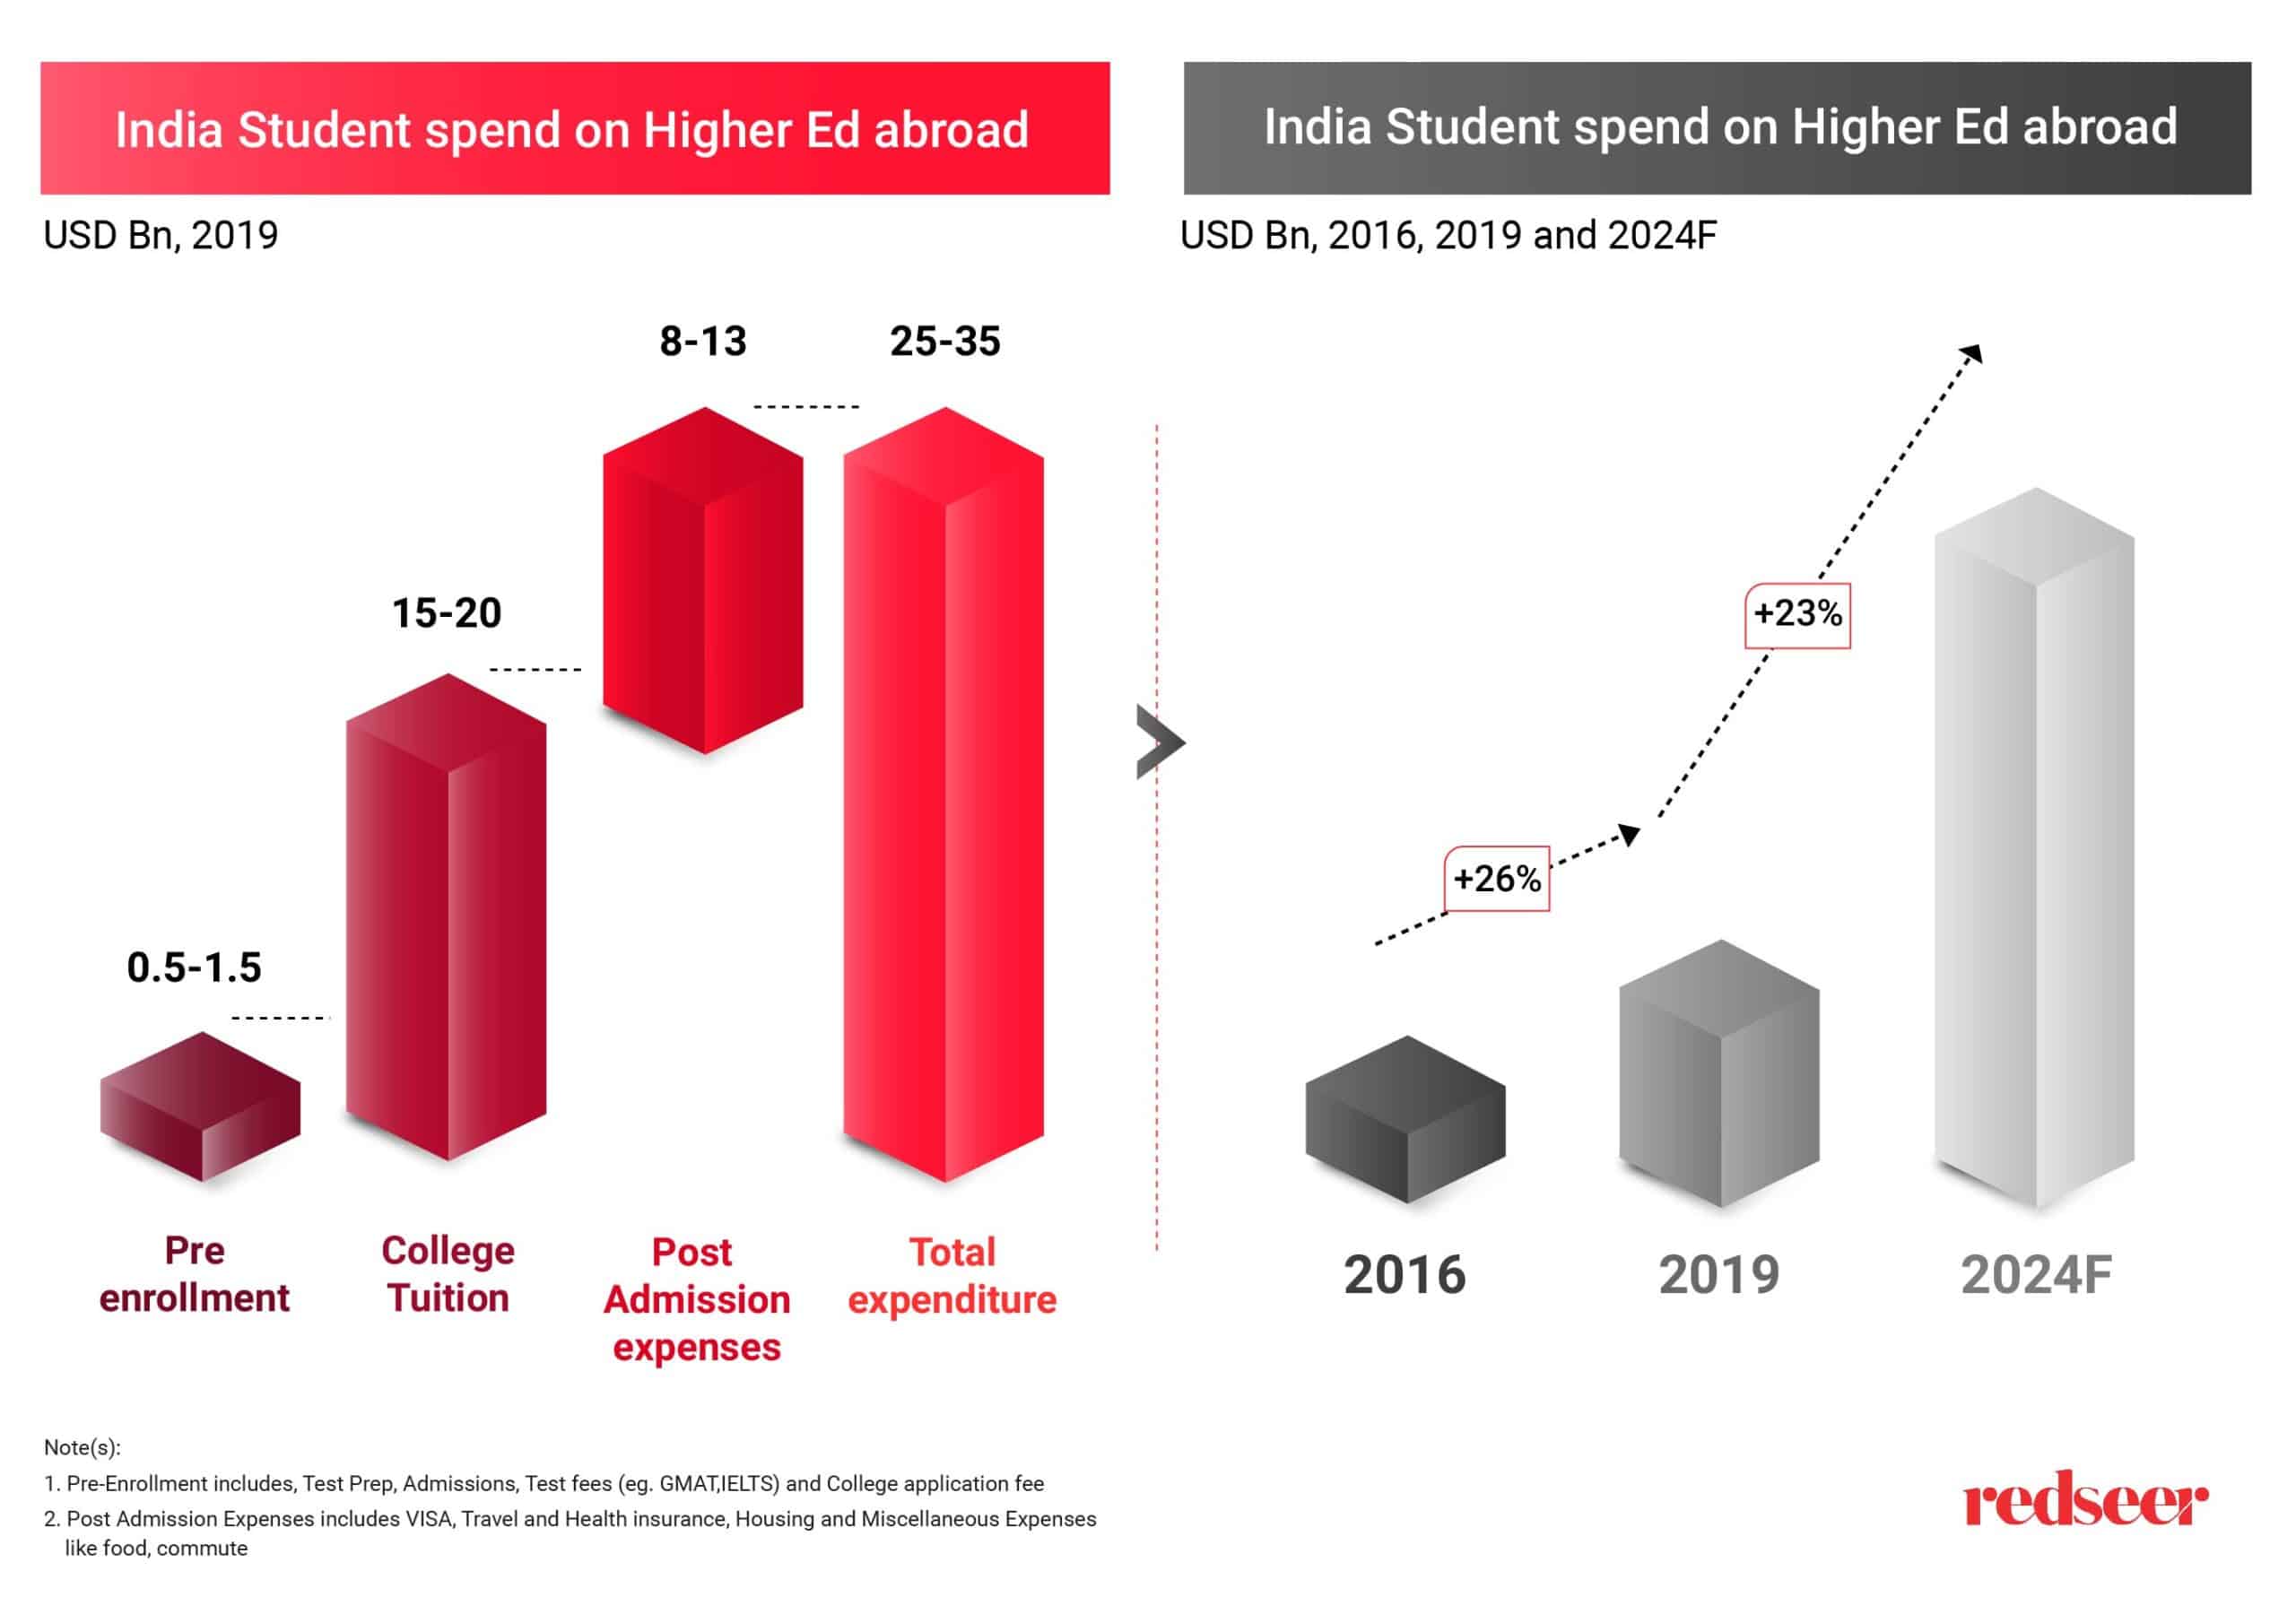 Graph of India student spend on Higher Education Abroad